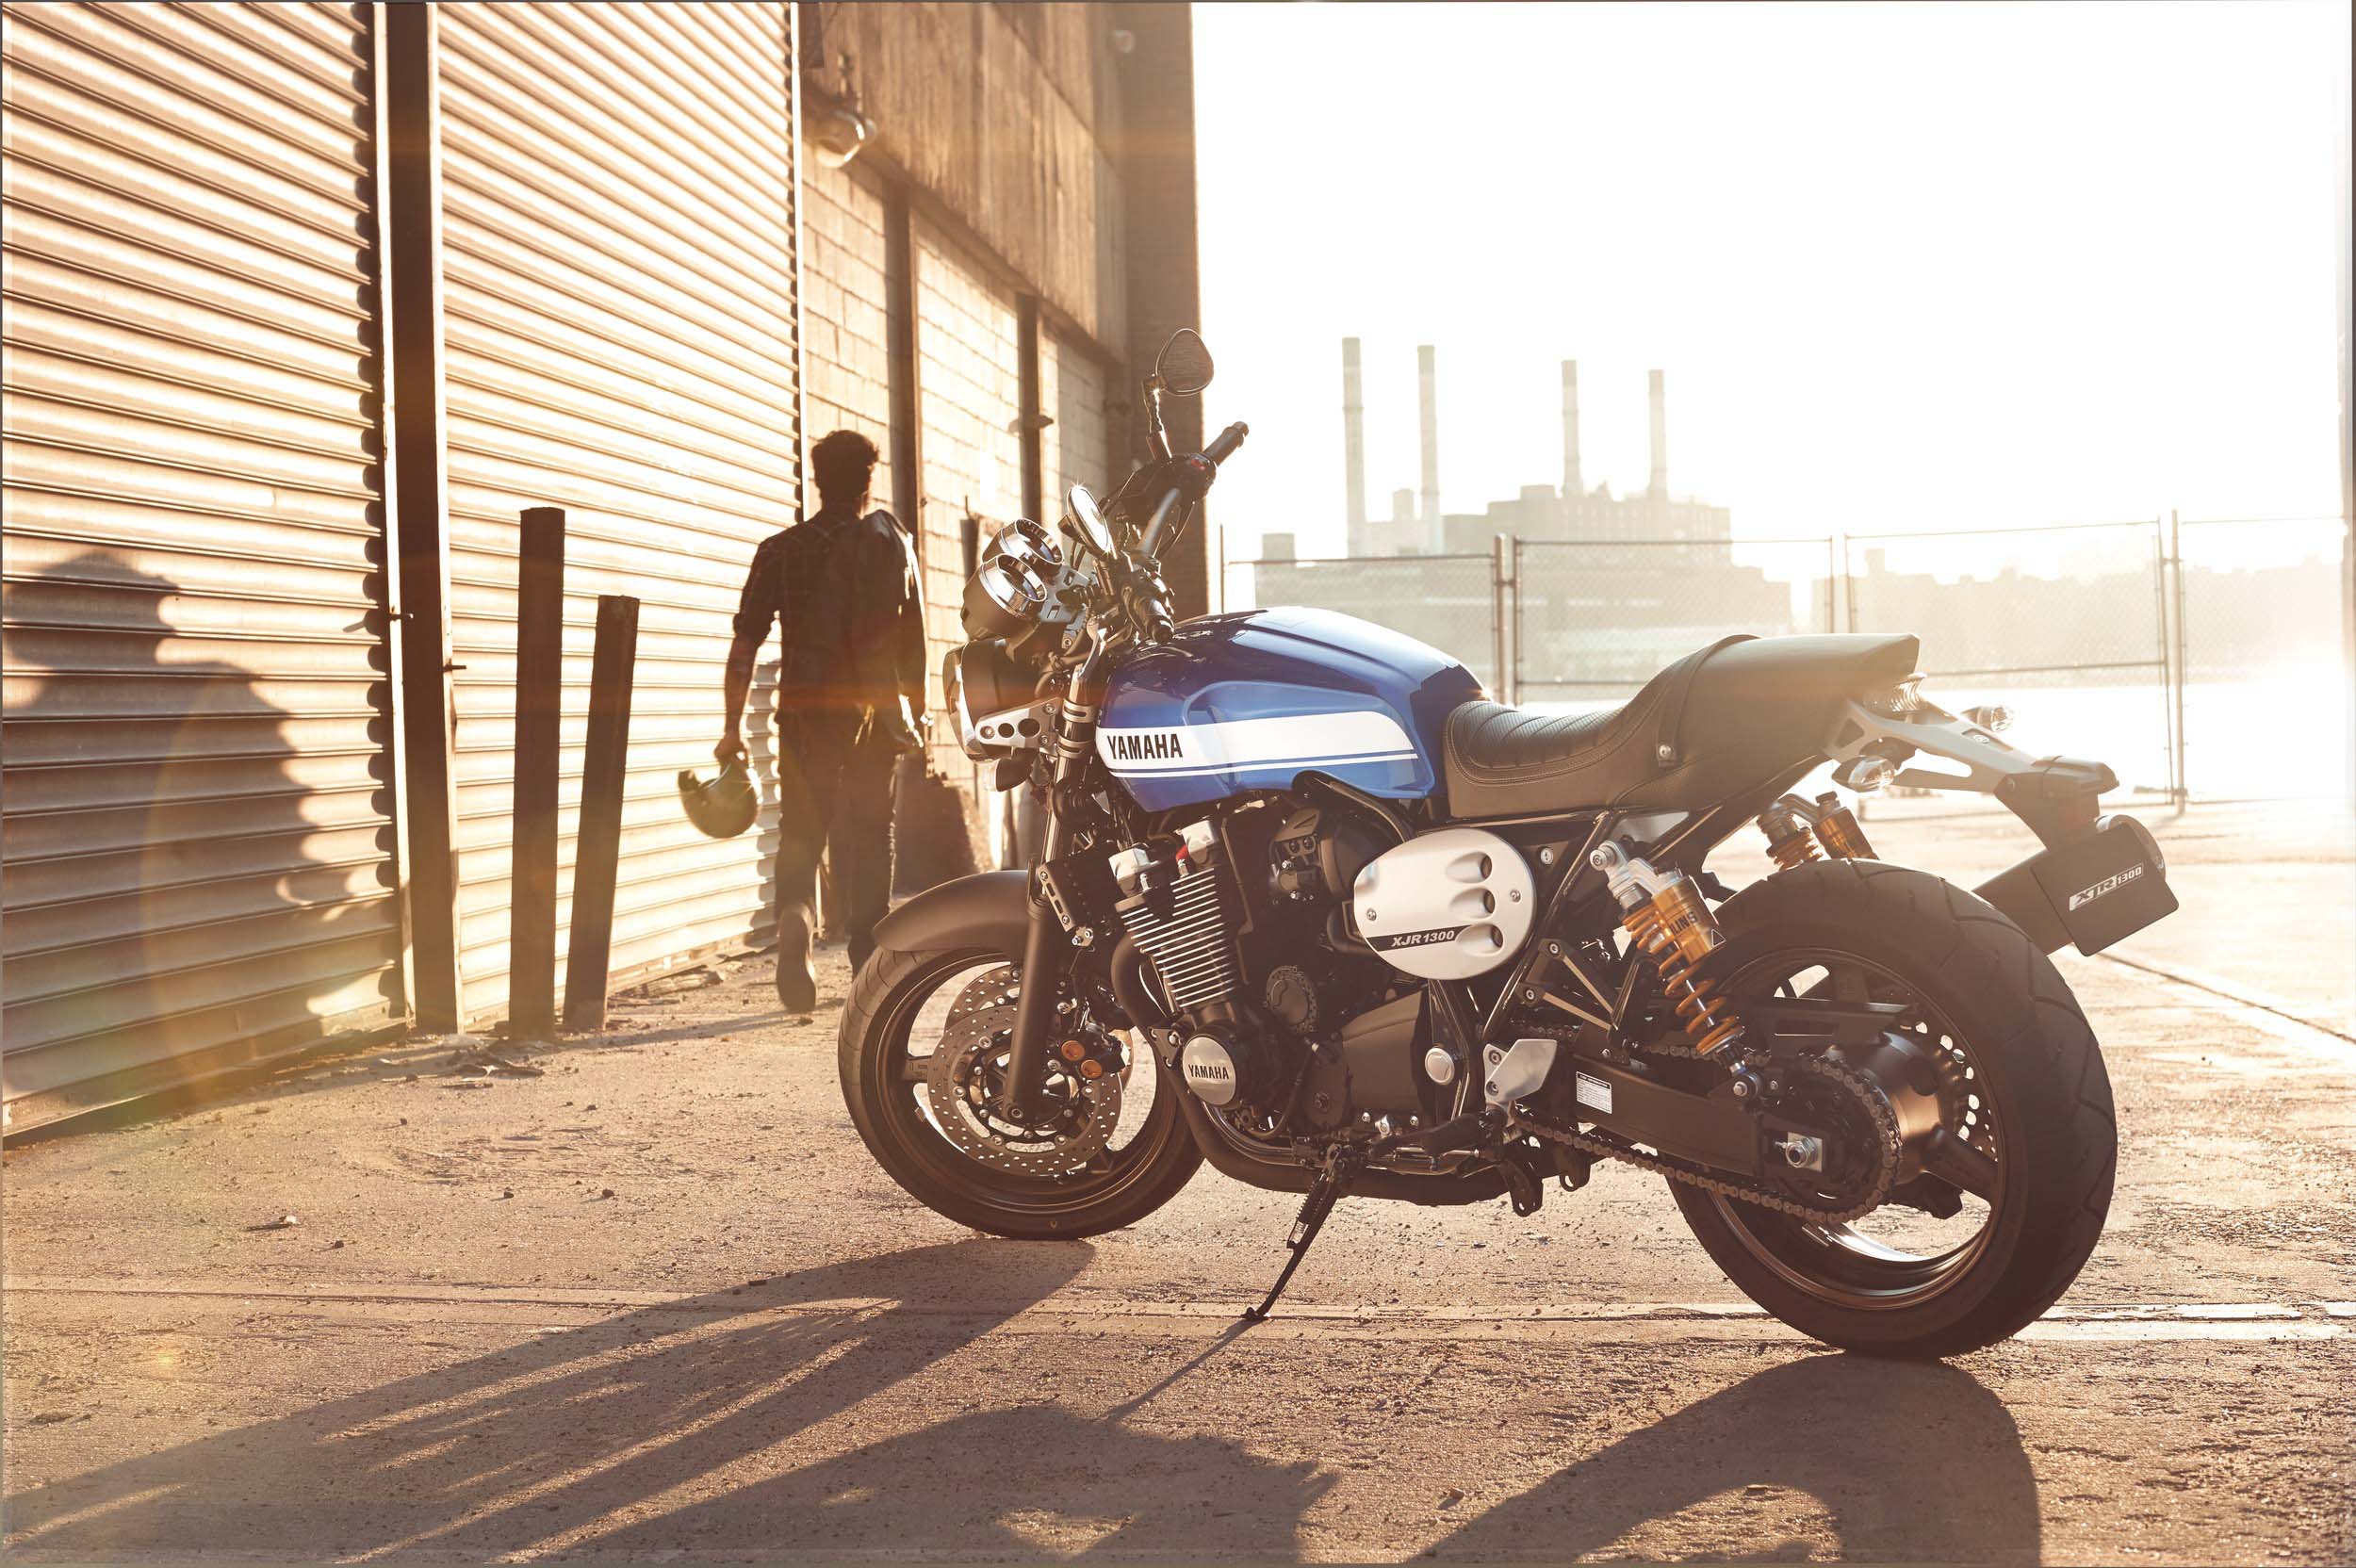 Yamaha xjr1300 (1998-2014) review and used buying guide | mcn